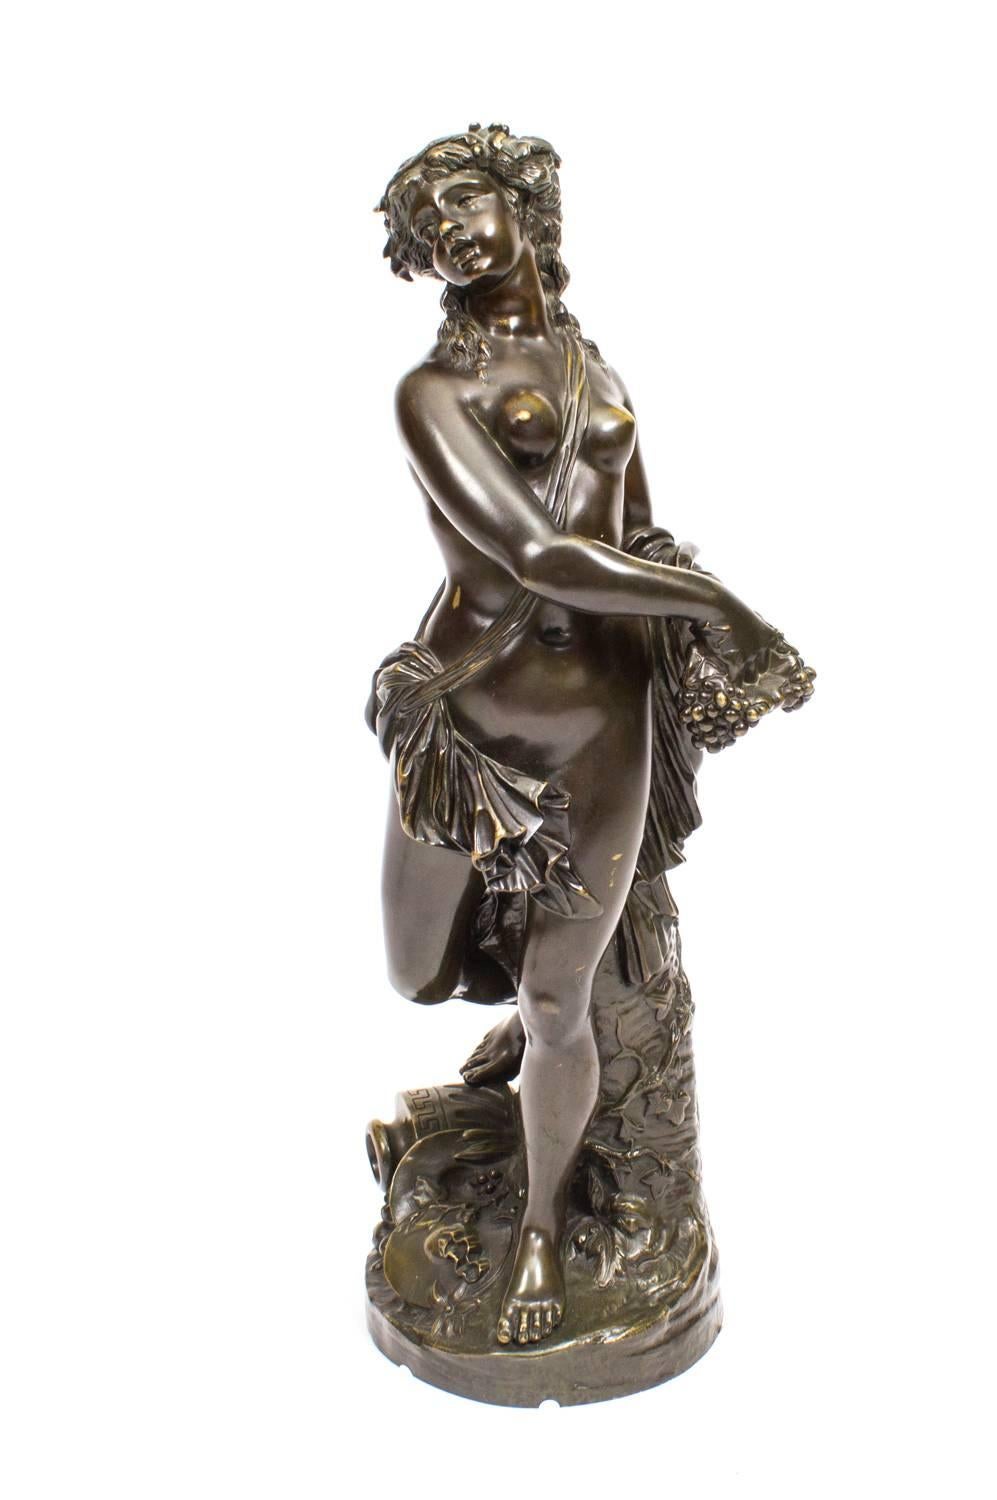 This is a beautiful antique French dark patinated bronze Bacchante sculpture after Clodion ( 1738-1814) and C1880 in date.

This stunning bronze is superbly cast with a brown patina representing a naked Bacchante against a tree with ivy twisted